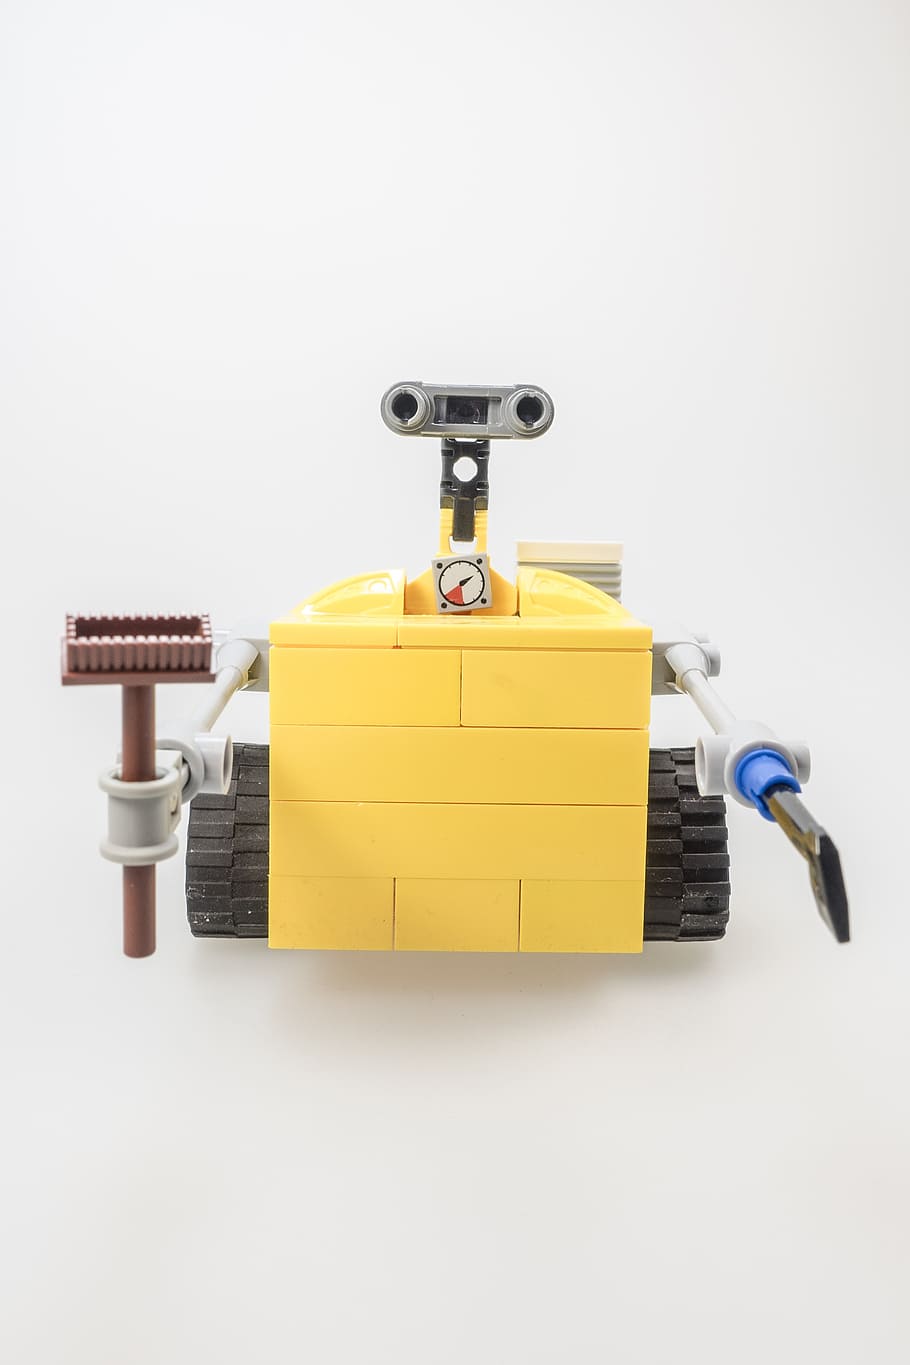 LEGO Wall-E Robot Character from Pixar Animated Movie Carrying a